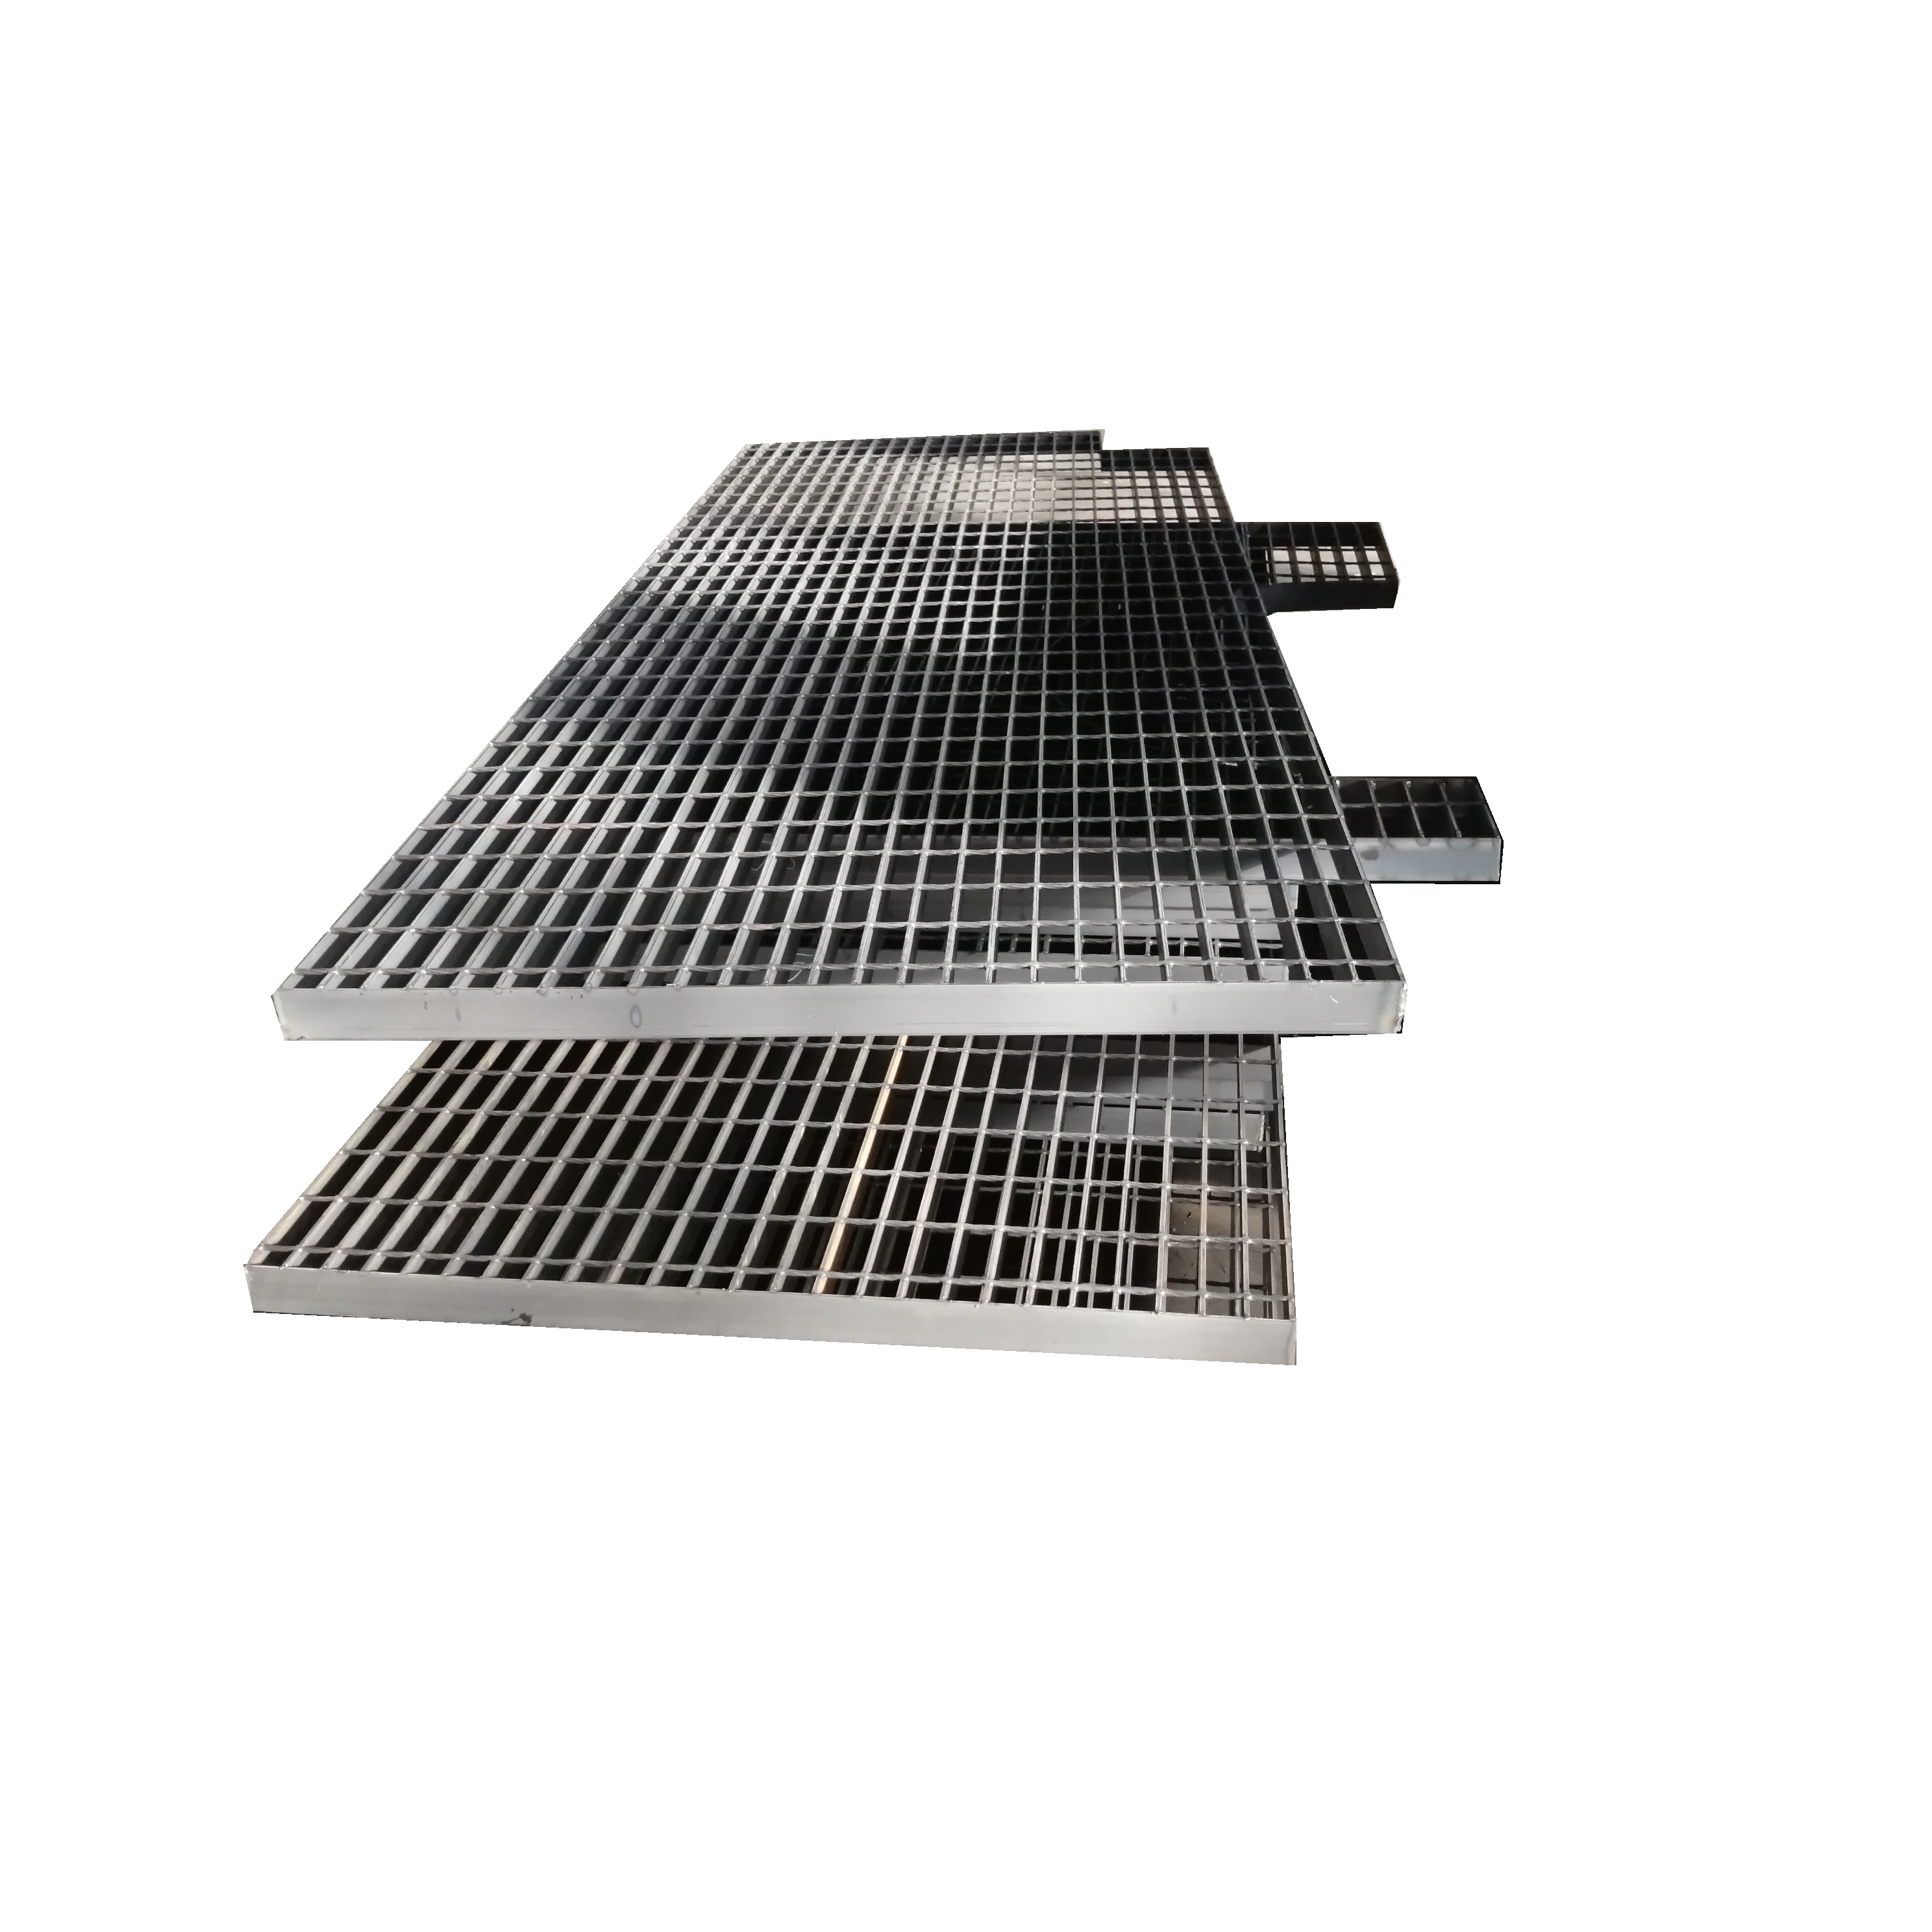 New Arrival China Galvanized Steel Structure Building - I 32 Stainless Galvanized Mild Standard Prices Weight Size Steel Grating  – Xiantang